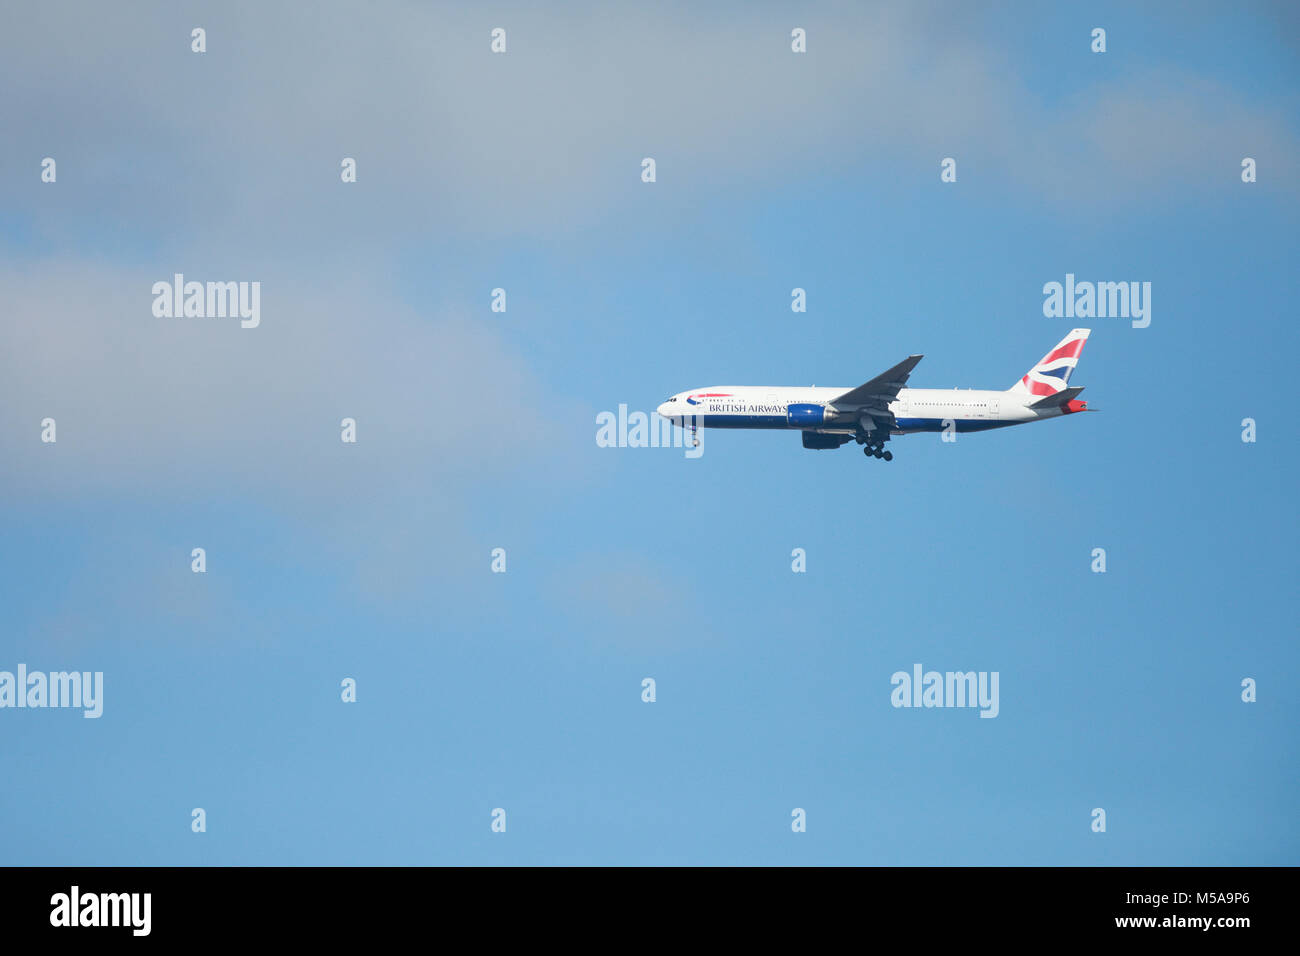 Airways Flugzeug High Resolution Stock Photography and Images - Alamy